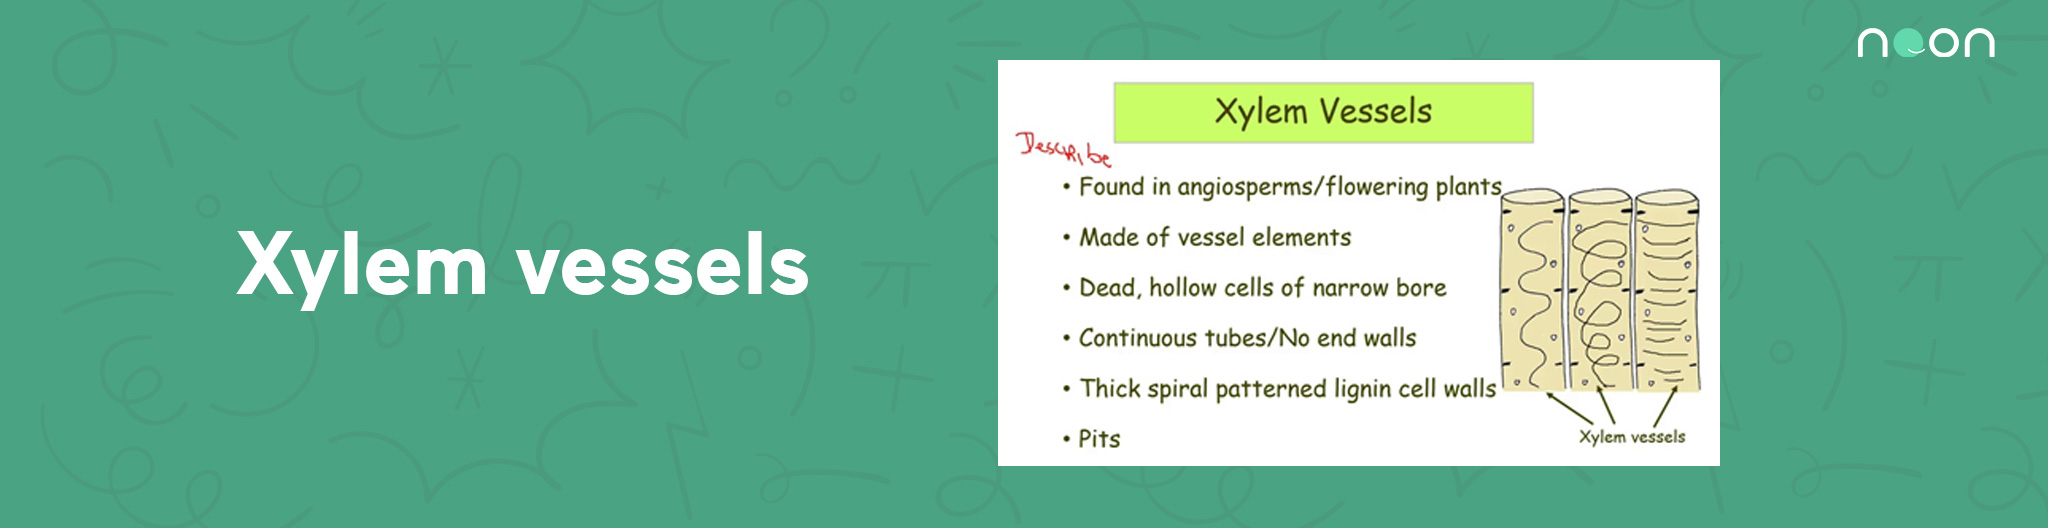 Xylem vessels functions